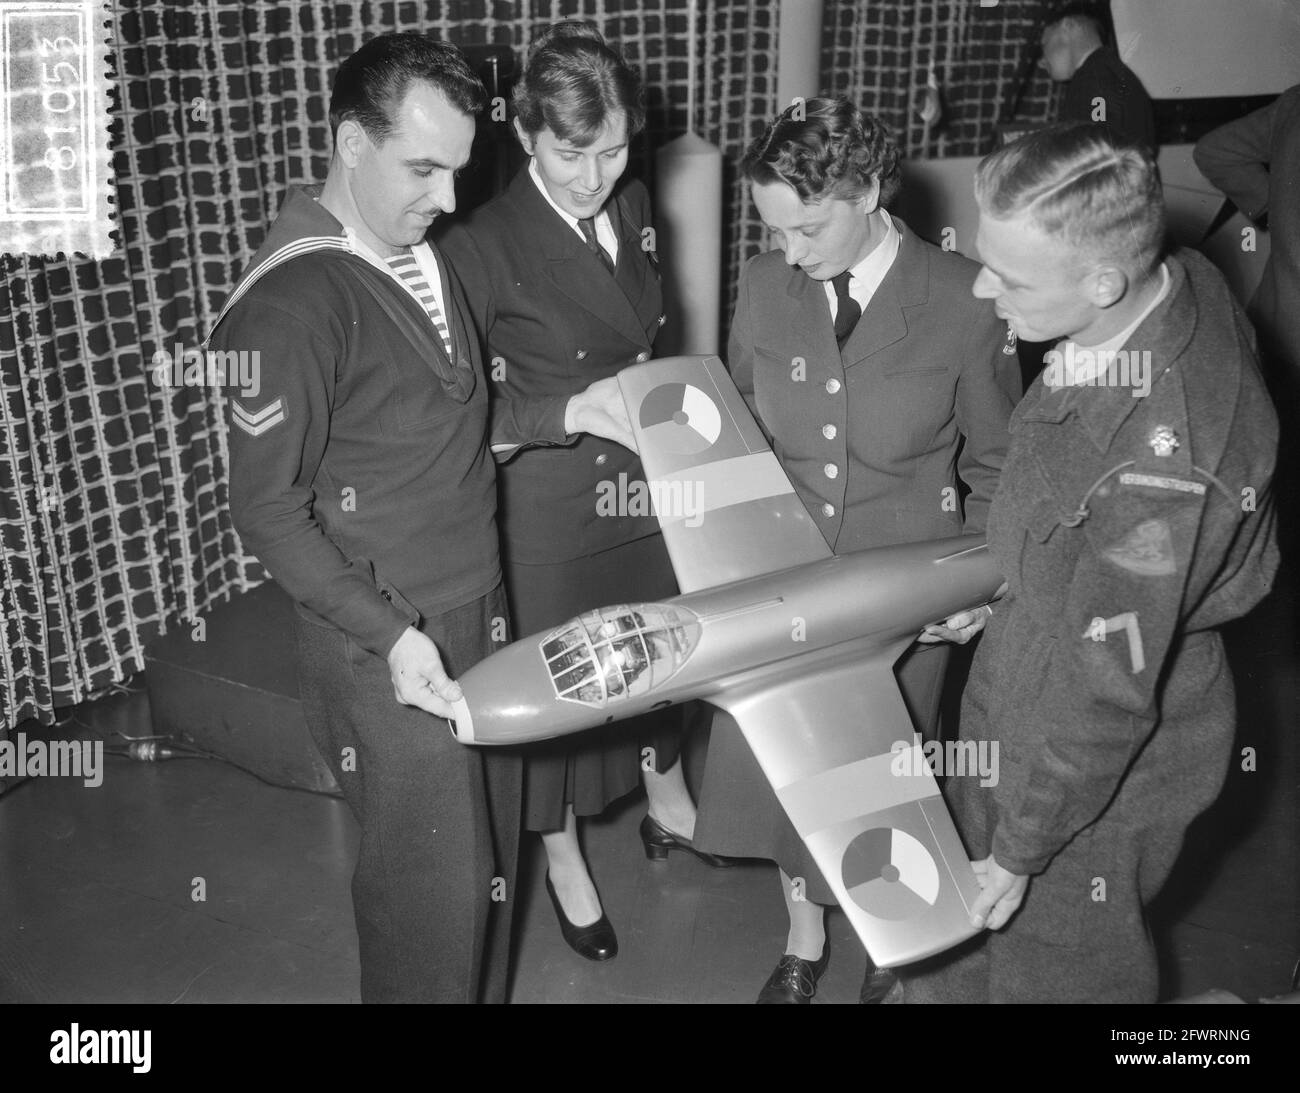 Dutch championships aircraft recognition at Shell The Hague, sailor, Marva and lieutenants of the air forces, aircraft model, October 27, 1956, CHAMPIONSHIP, Sailors, The Netherlands, 20th century press agency photo, news to remember, documentary, historic photography 1945-1990, visual stories, human history of the Twentieth Century, capturing moments in time Stock Photo